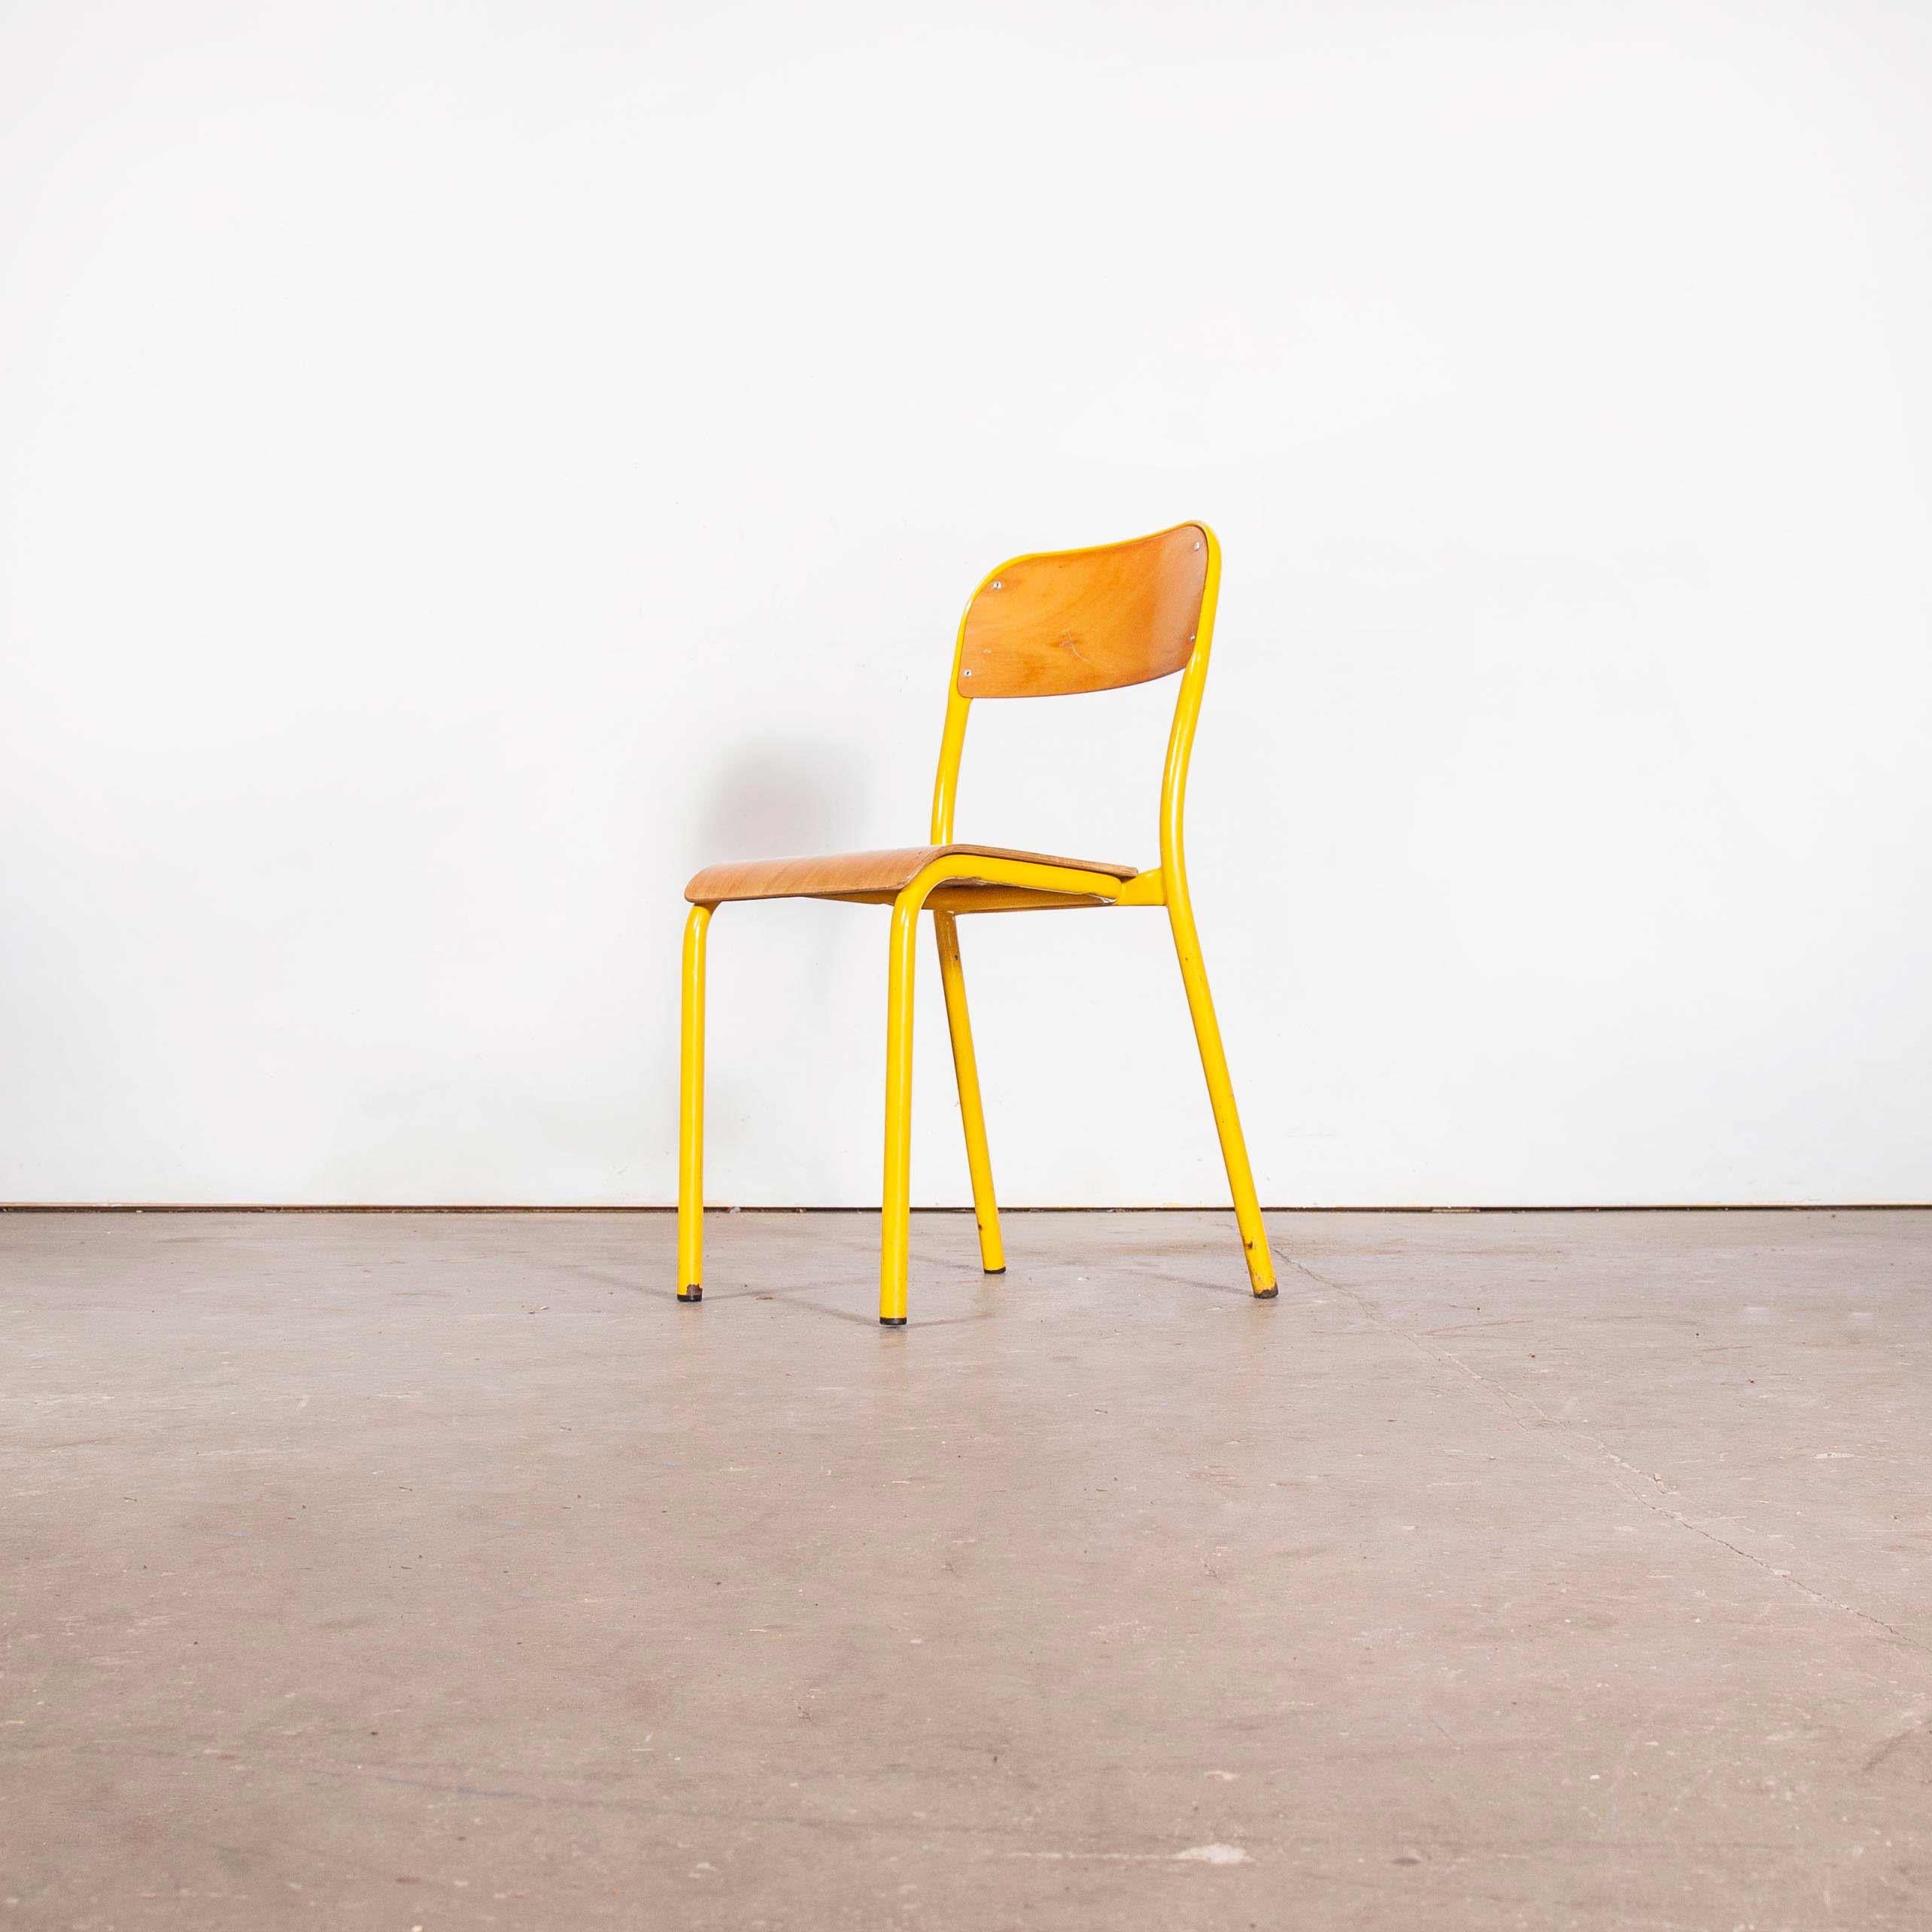 1960s yellow framed stacking school dining chairs – various quantities available
1960s British beech stacking dining chairs – fabulous yellow – good quantities available. We have a batch of these brilliant high quality practical stacking chairs.